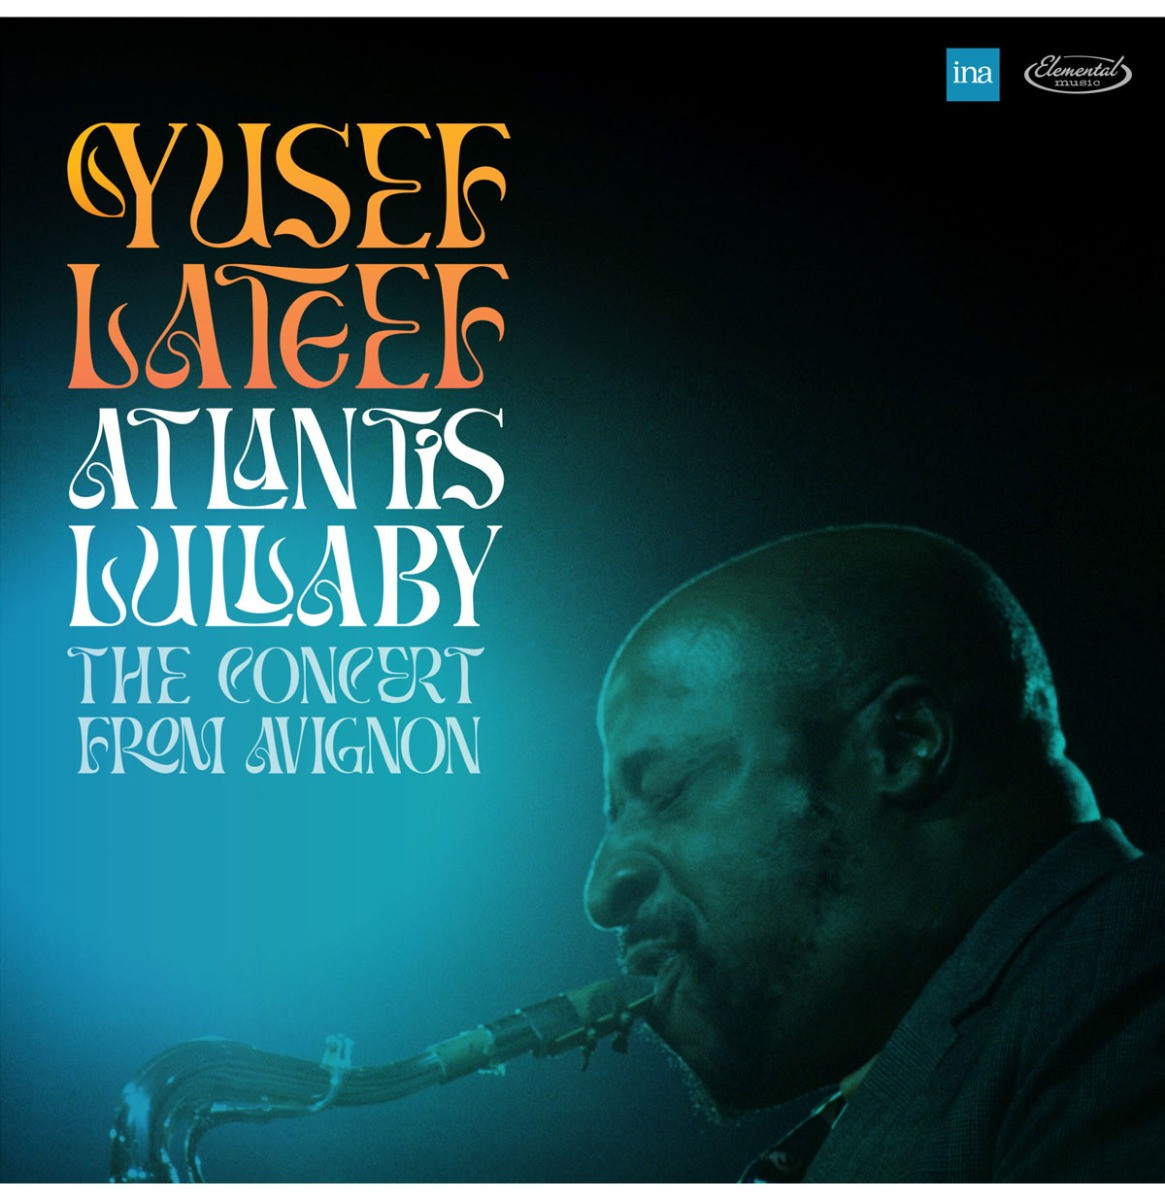 Yusef Lateef - Atlantis Lullaby: The Concert From Avignon (Record Store Day 2024) 2LP